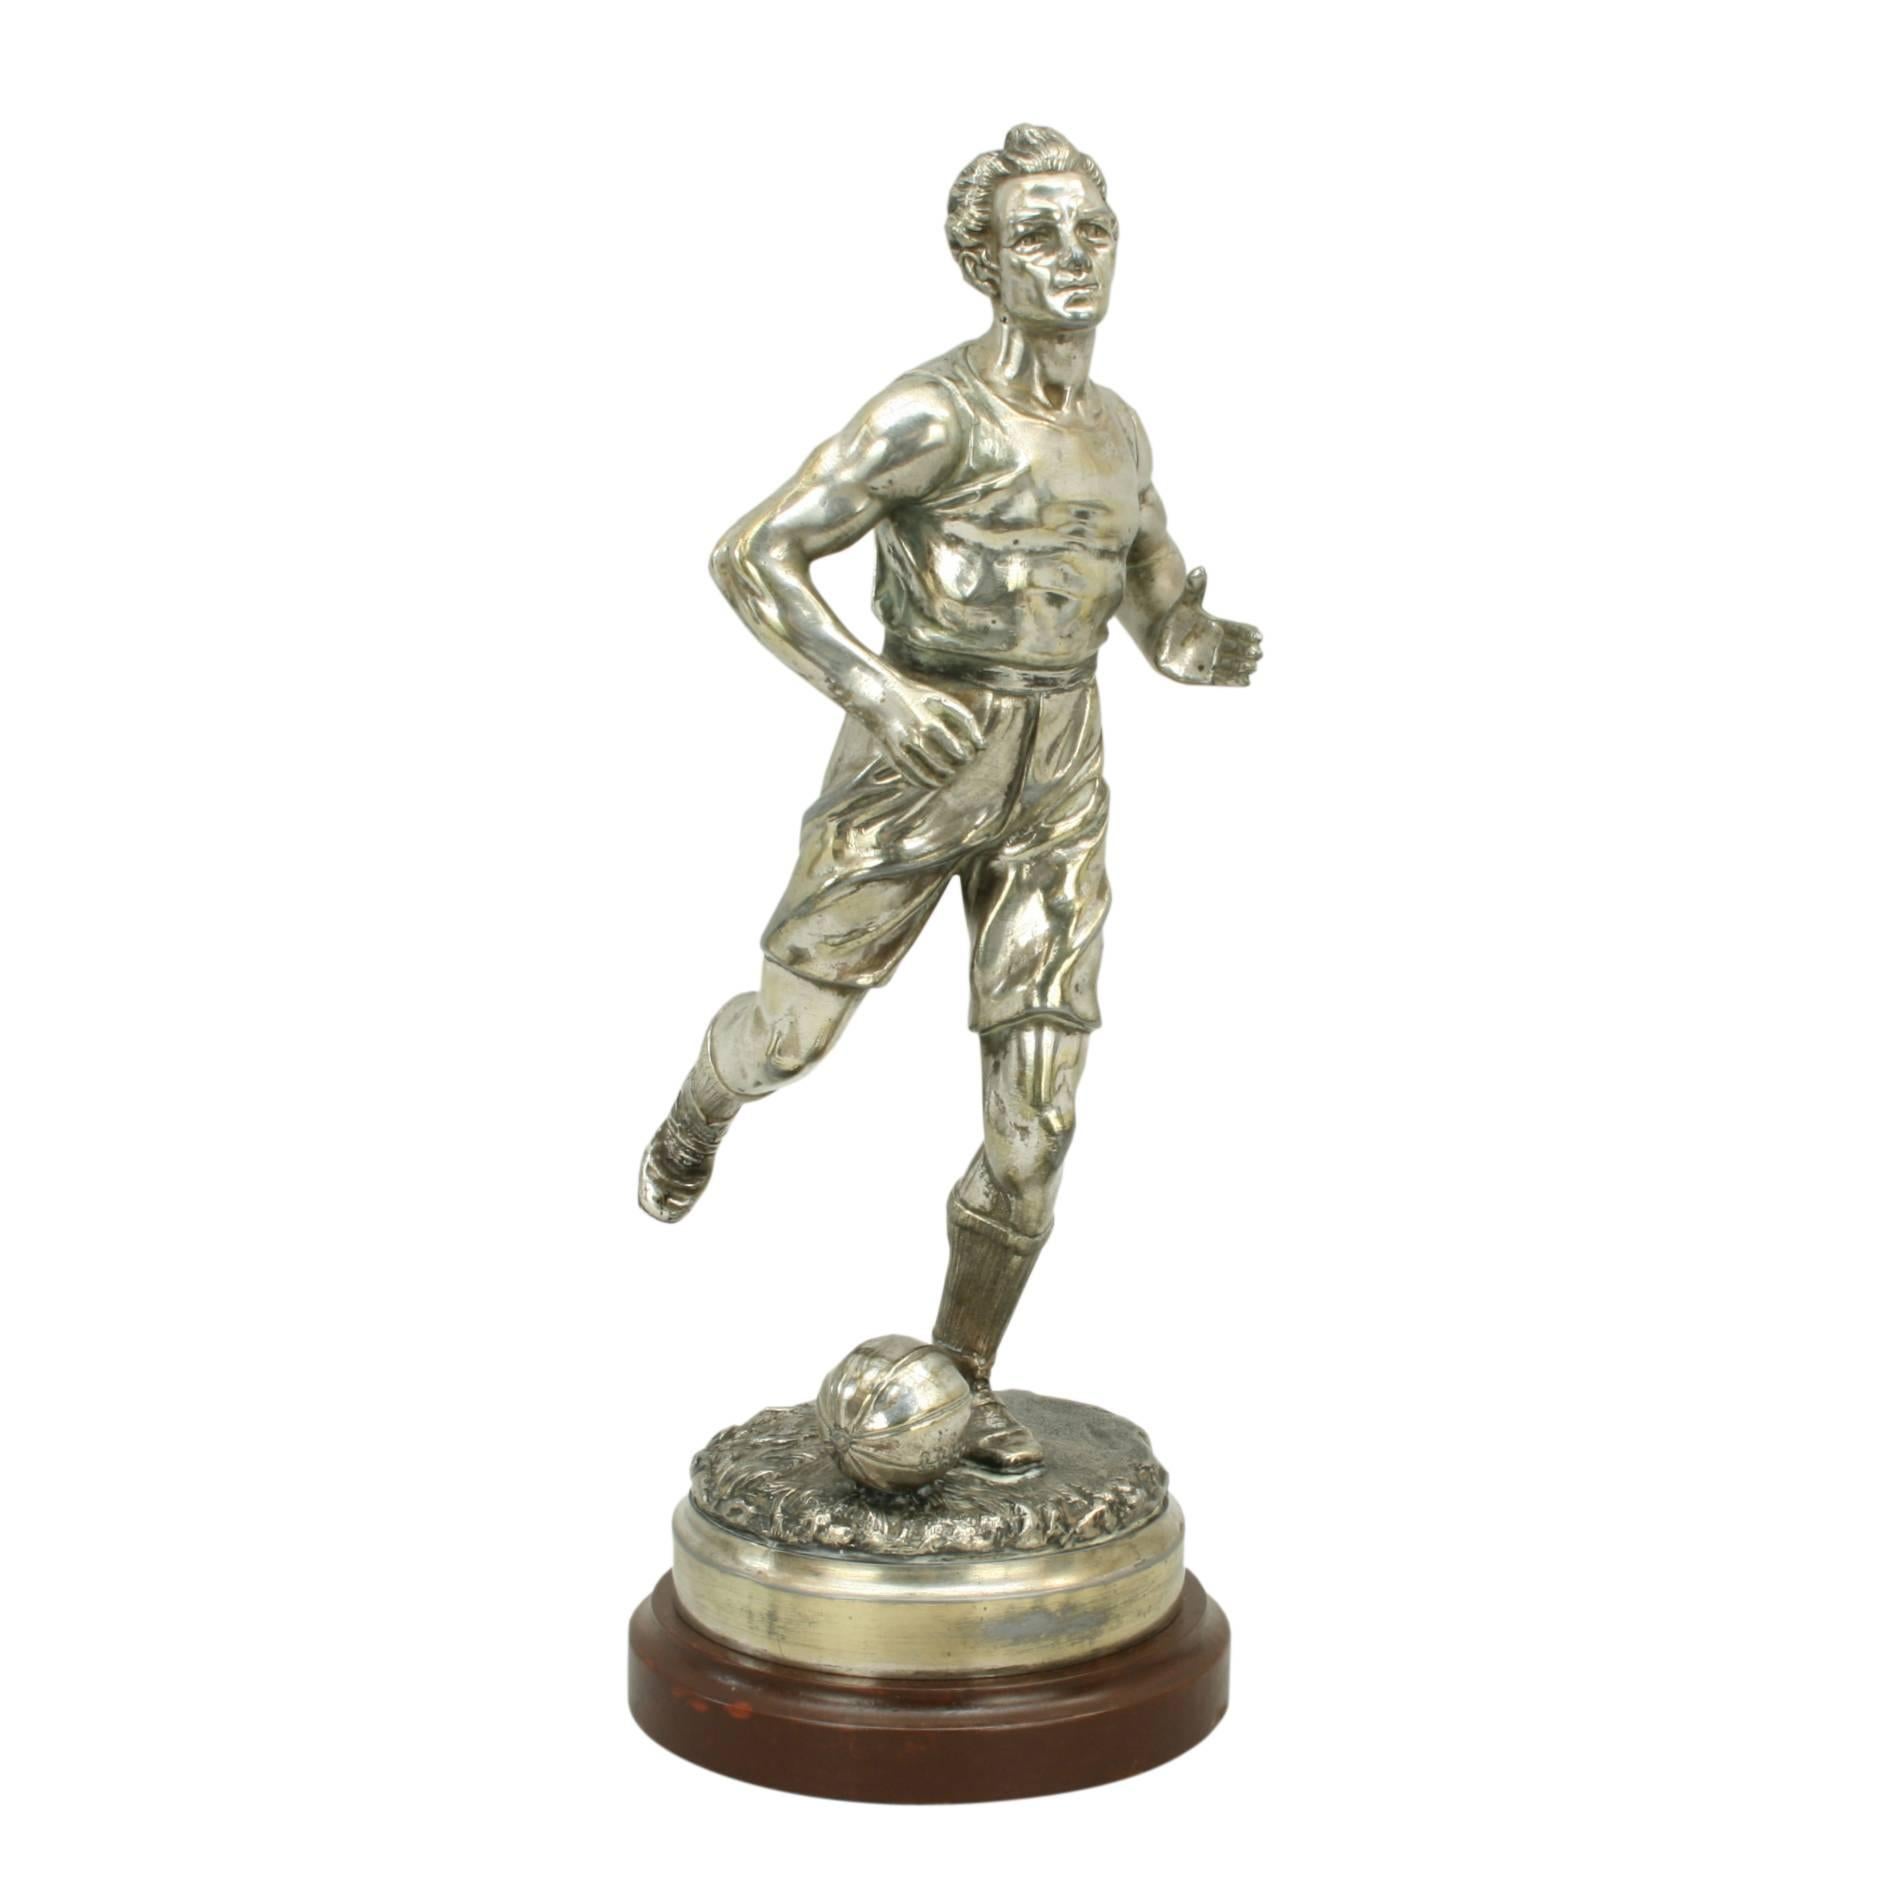 A very nice French spelter figure of a footballer. The footballer is about to kick a football with his right foot, the football is an early shaped ball. The figure is mounted onto a turned wooden base. The sculpture is signed "Gregoire" on